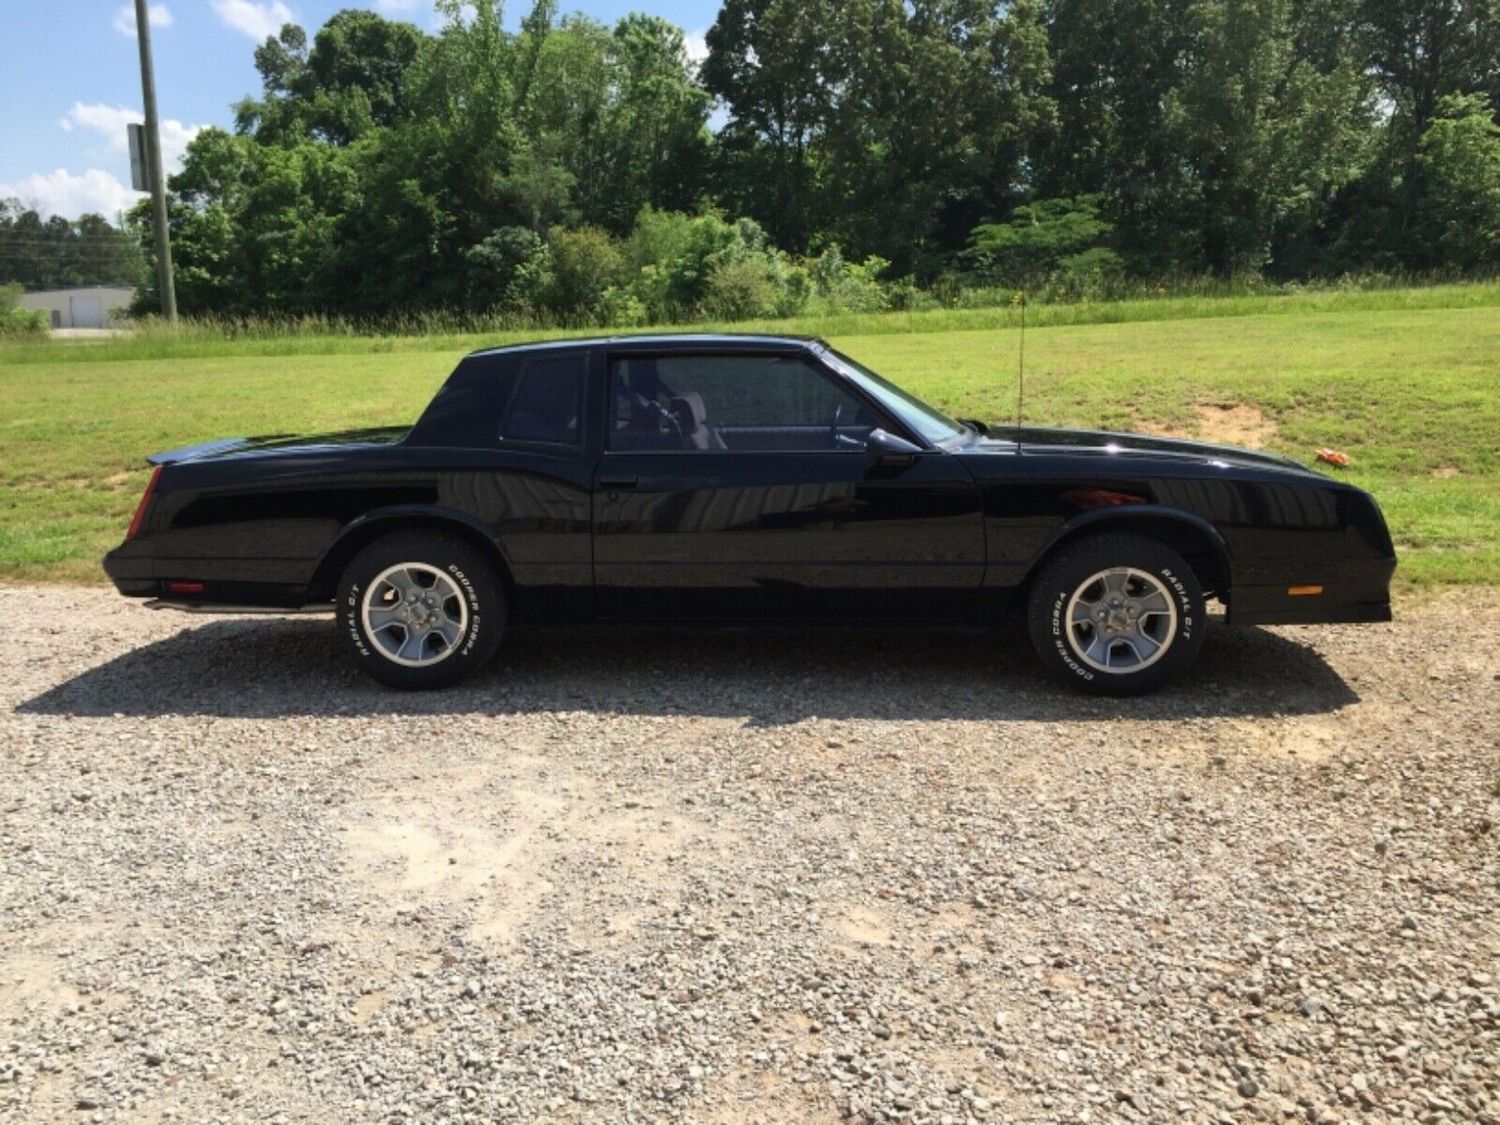 Chevrolet Monte Carlo SS parked outside